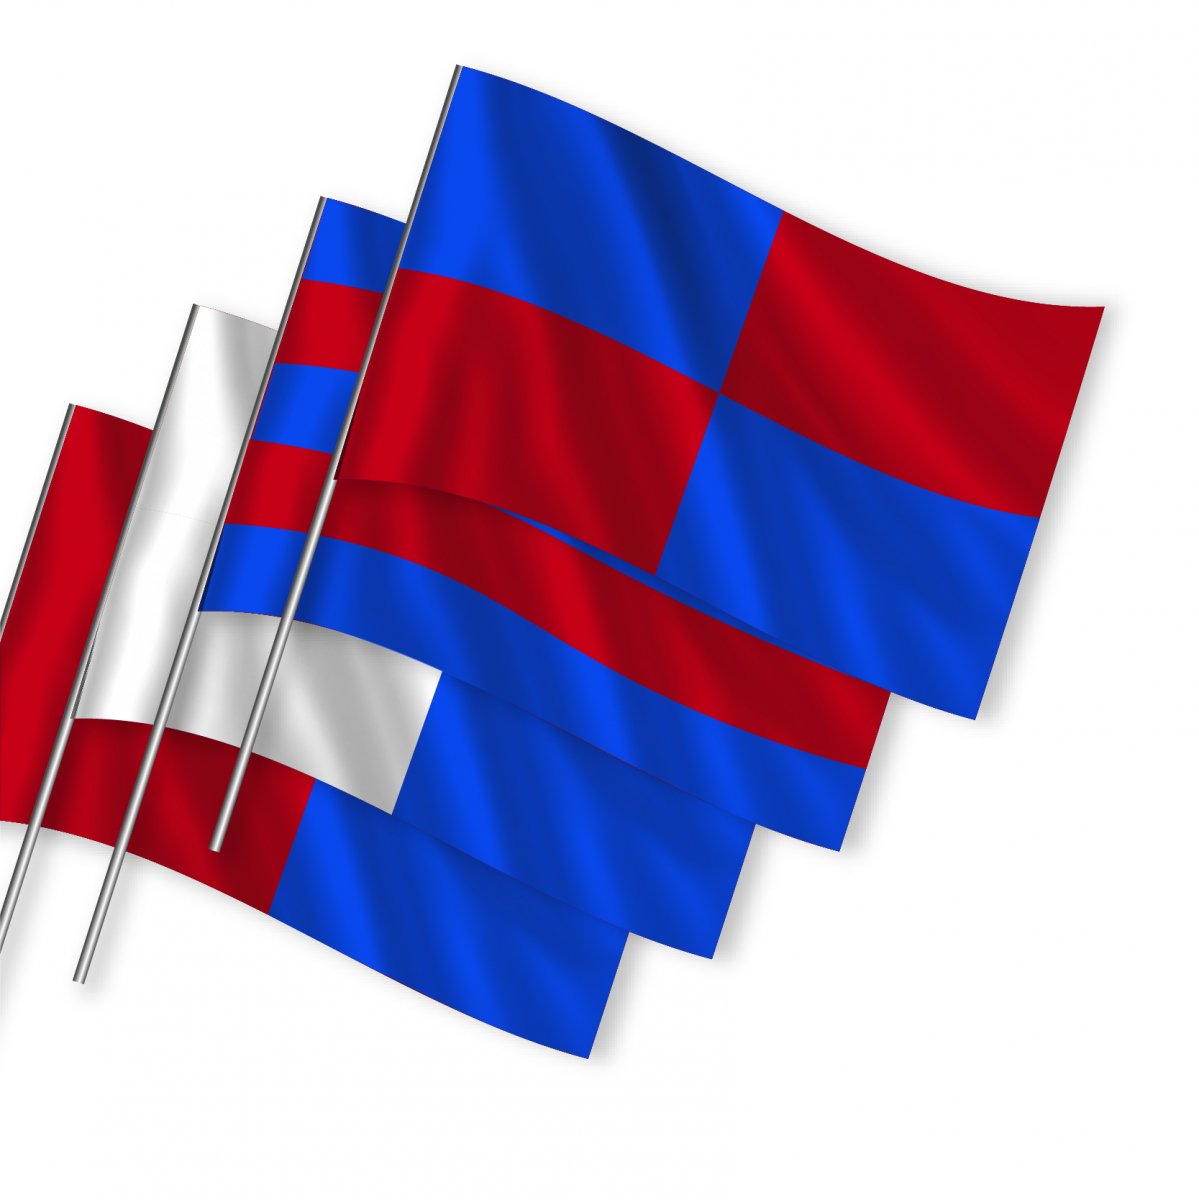 Swivel flags according to pattern